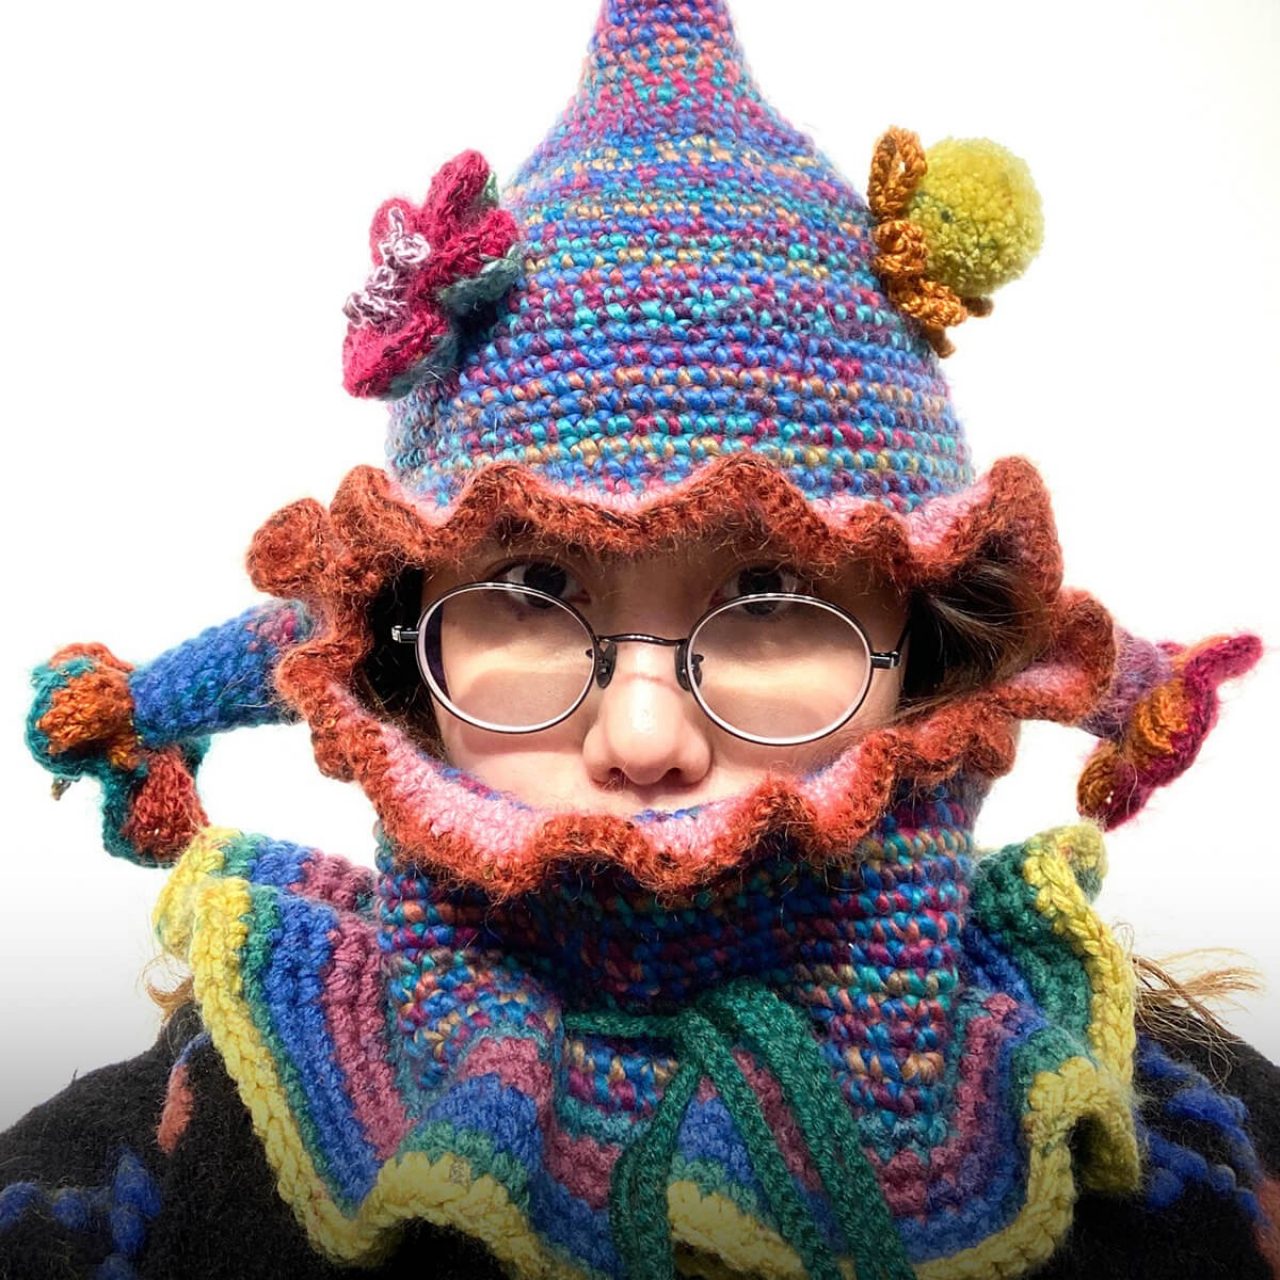 Chenyang Mu wears a colorful woollen hat and glasses while looking directly into the camera. Chenyang's mouth is covered by clothing.